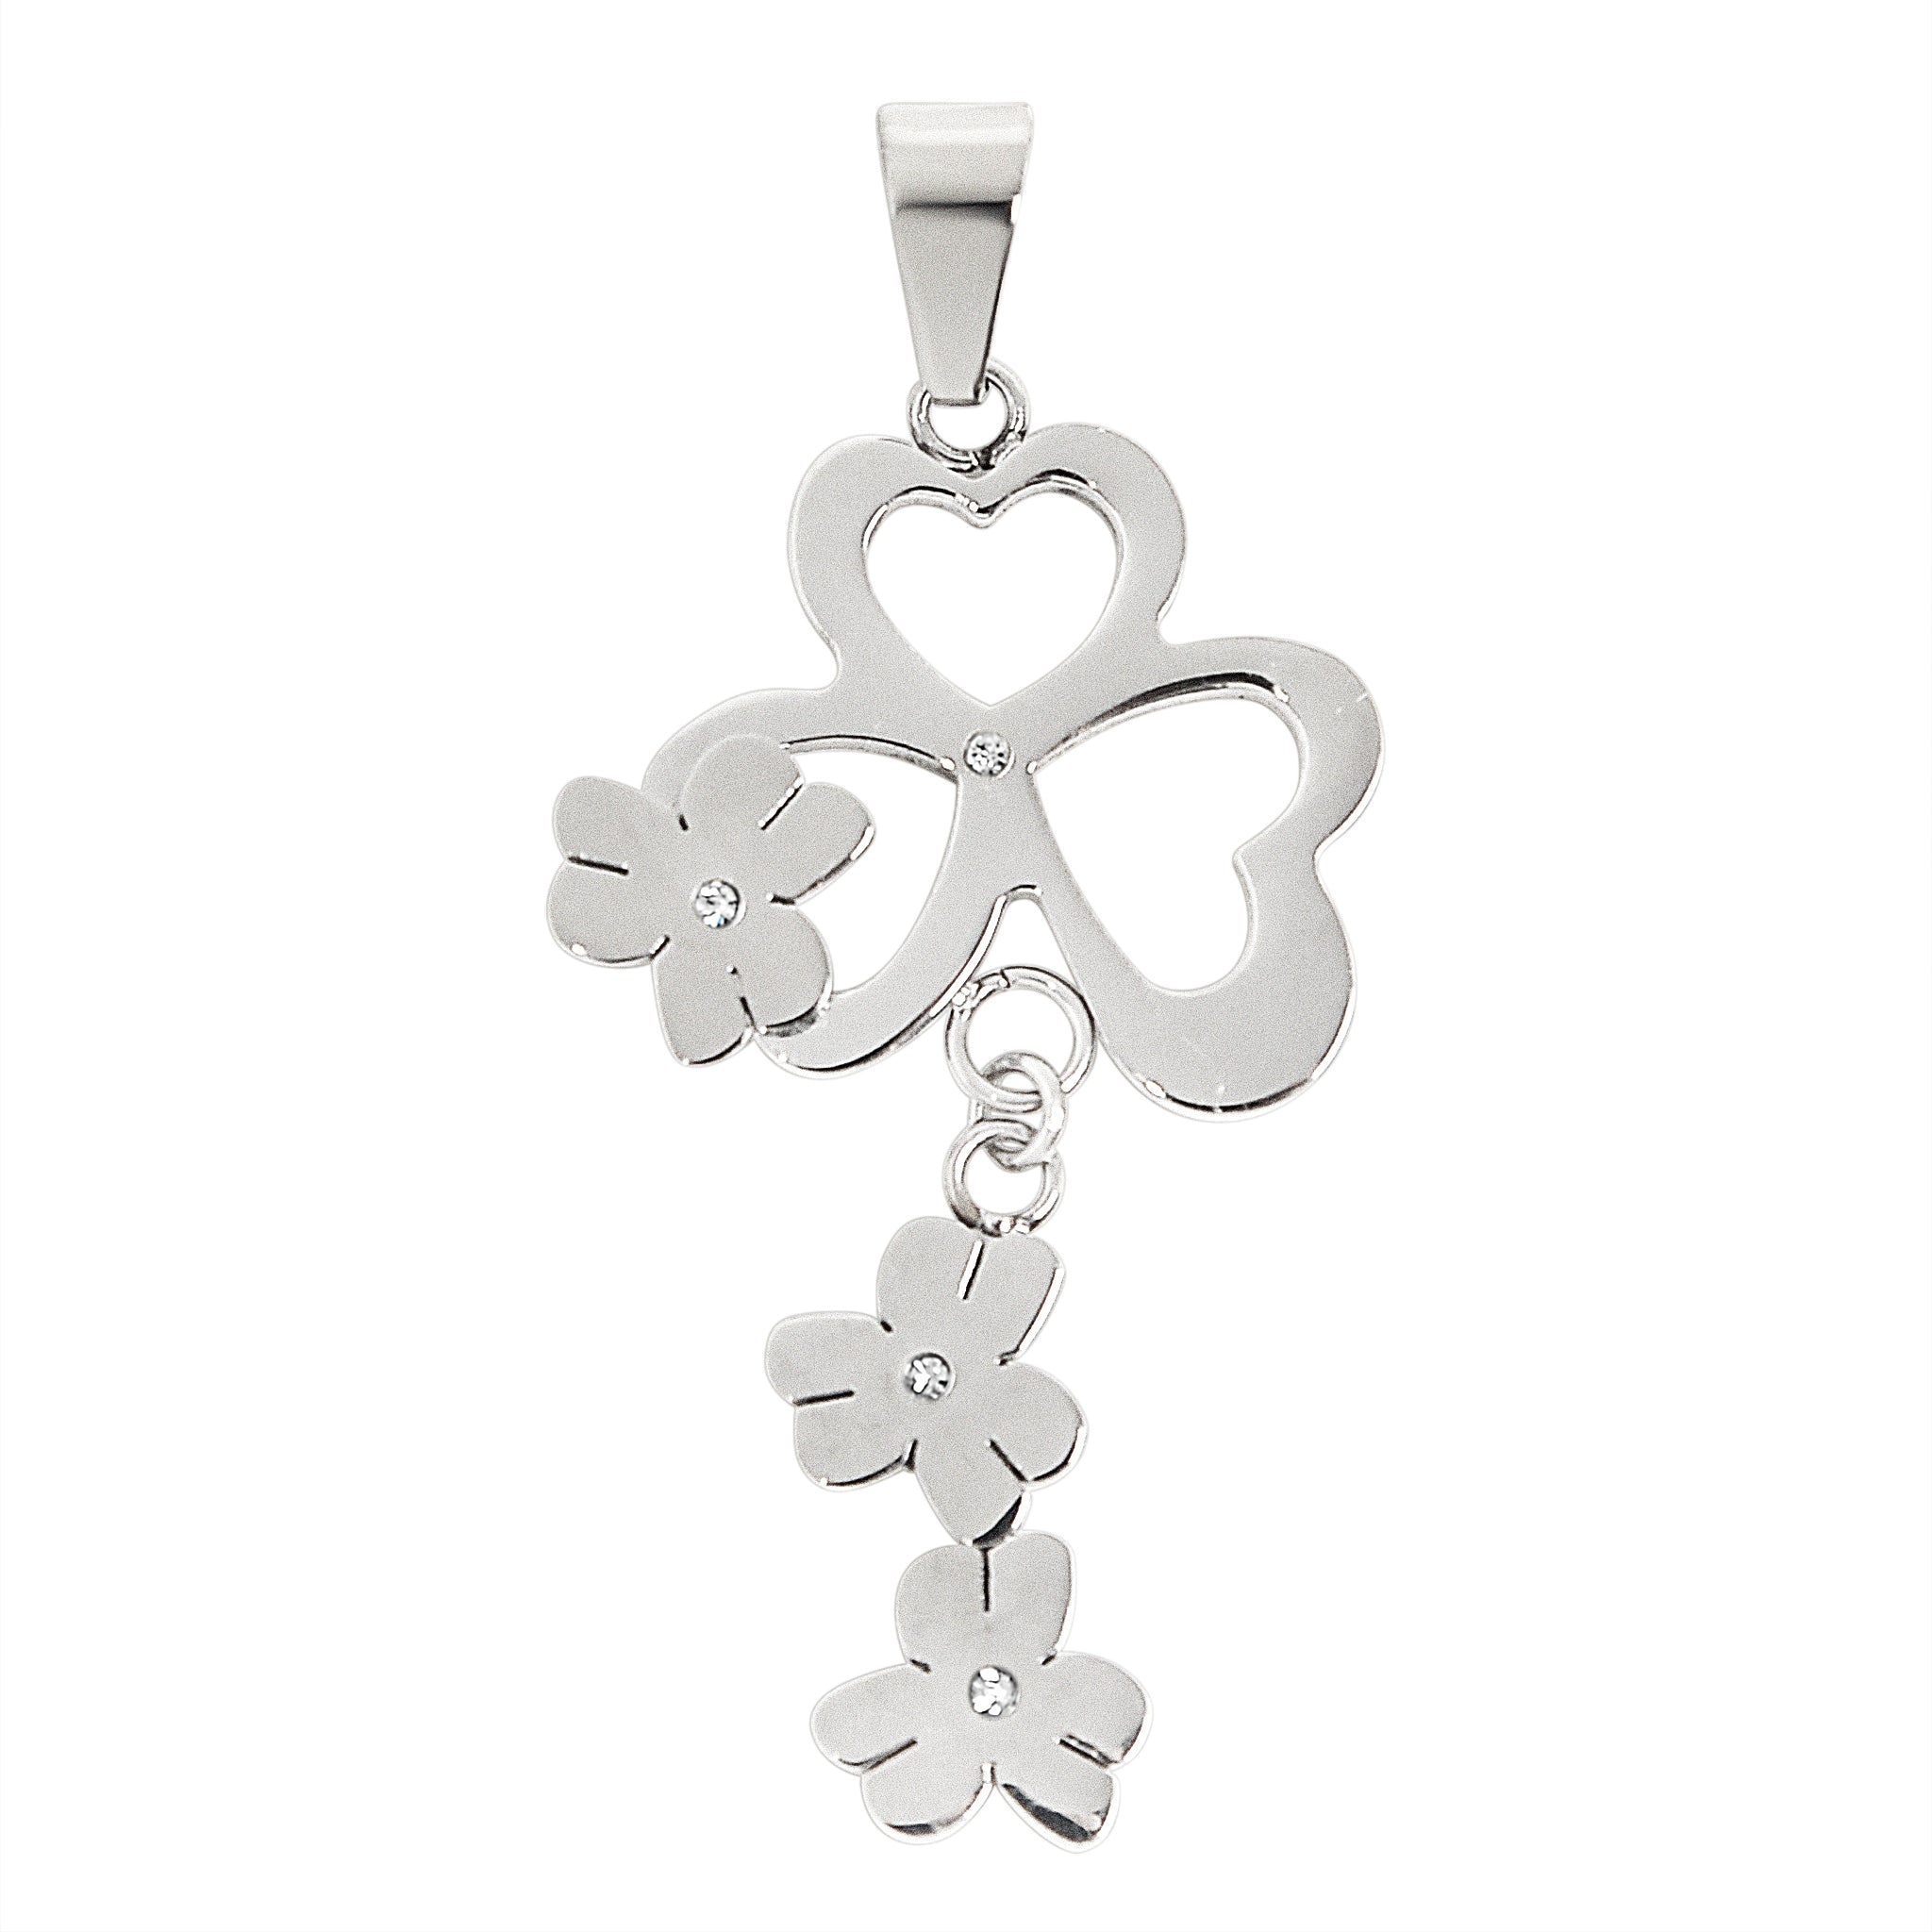 Stainless steel Cubic Zirconia hearts and flowers pendant.